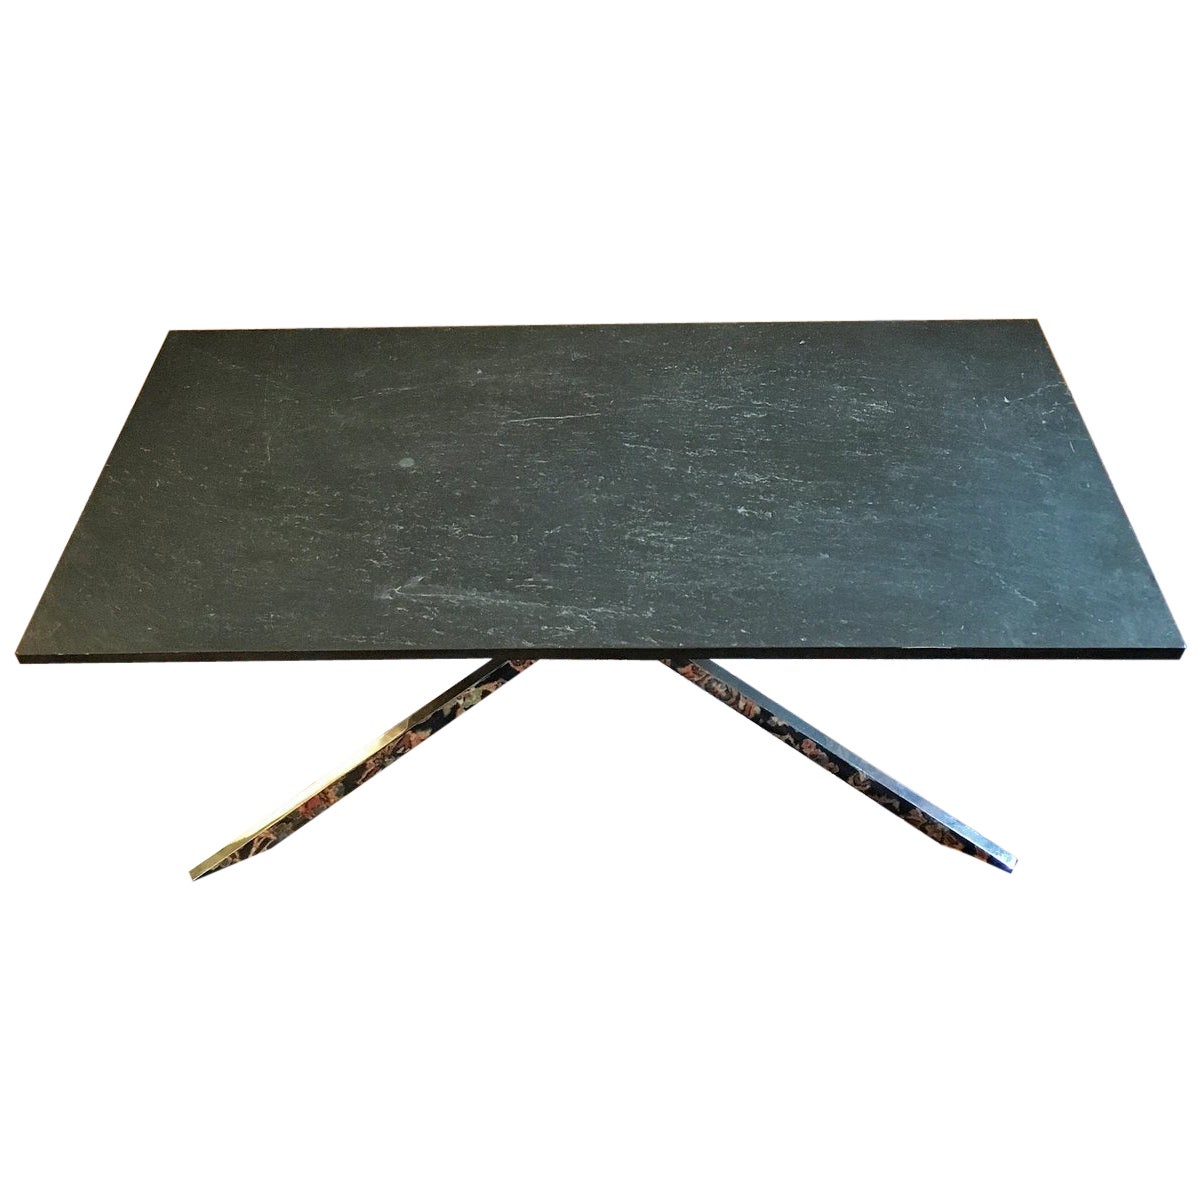 Spyder Table by Philip Jackson For Sale